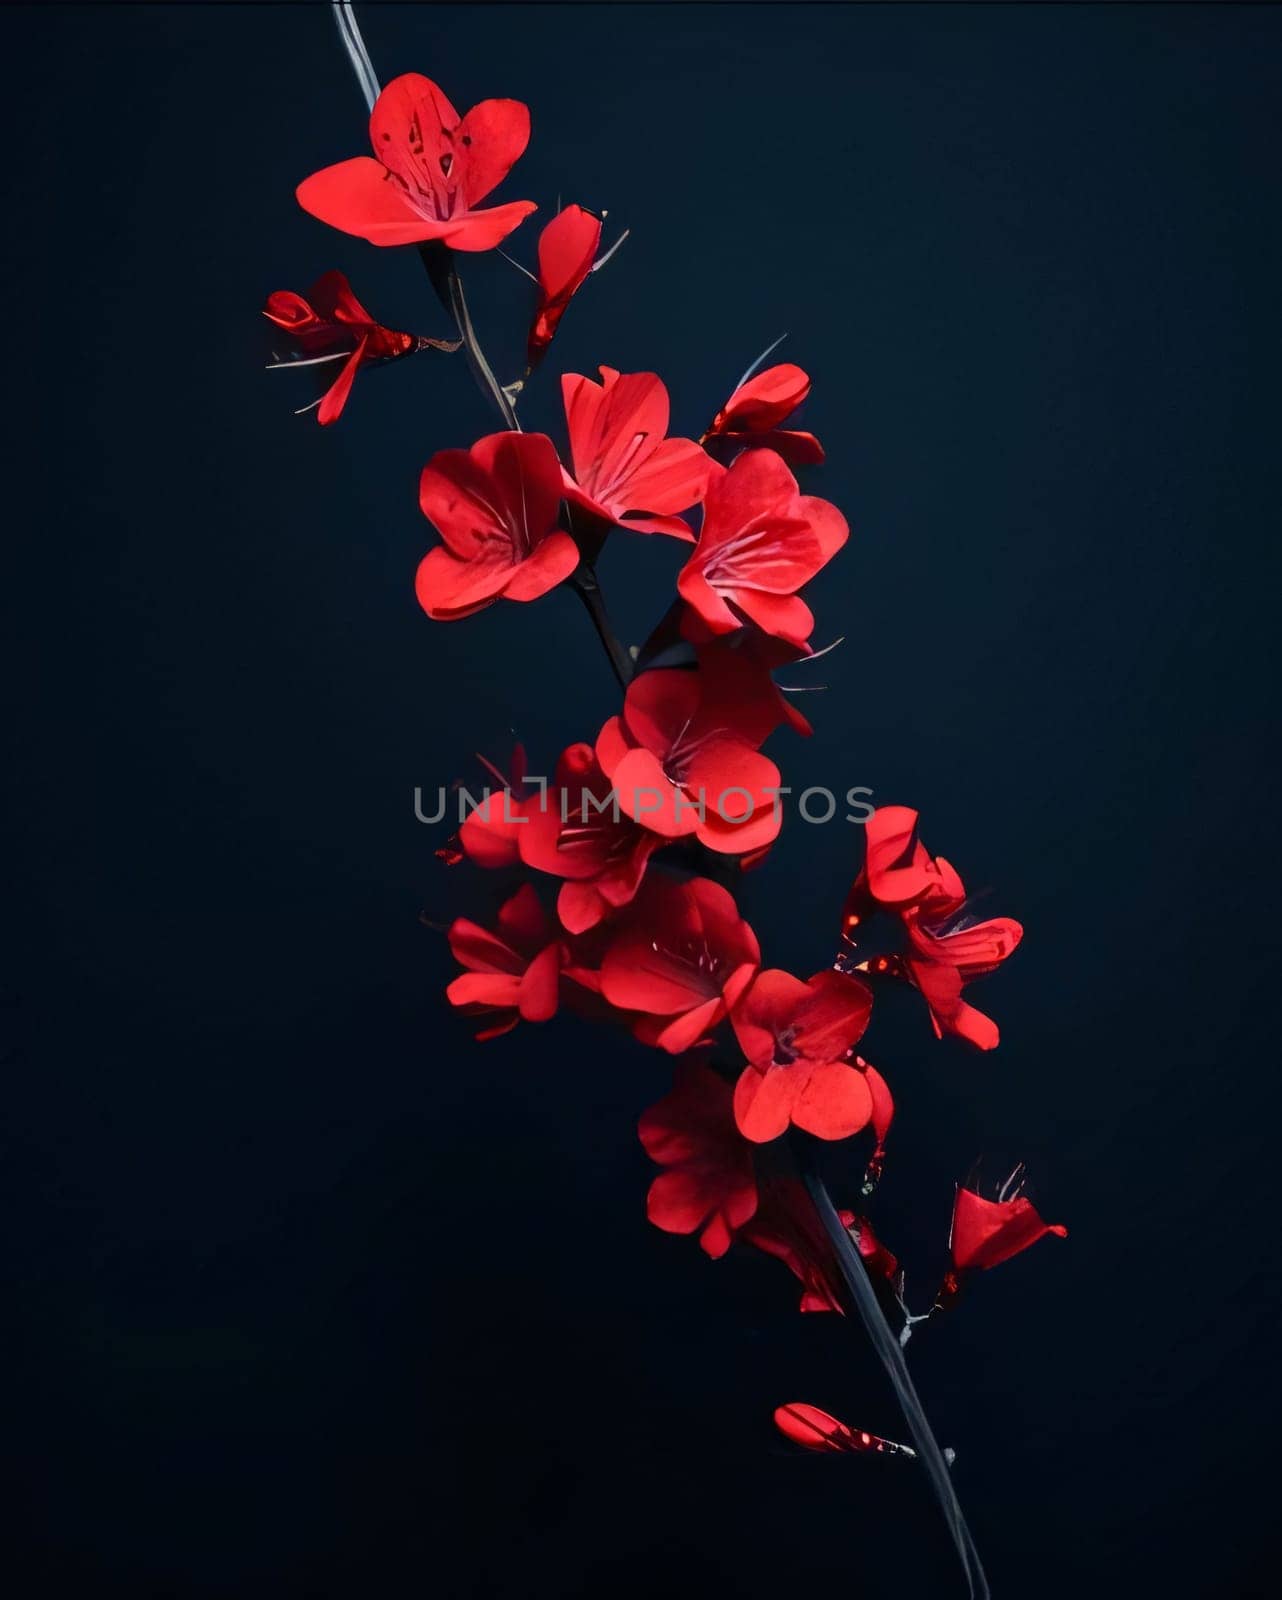 Red flower petals on a branch on a dark background. Flowering flowers, a symbol of spring, new life. by ThemesS